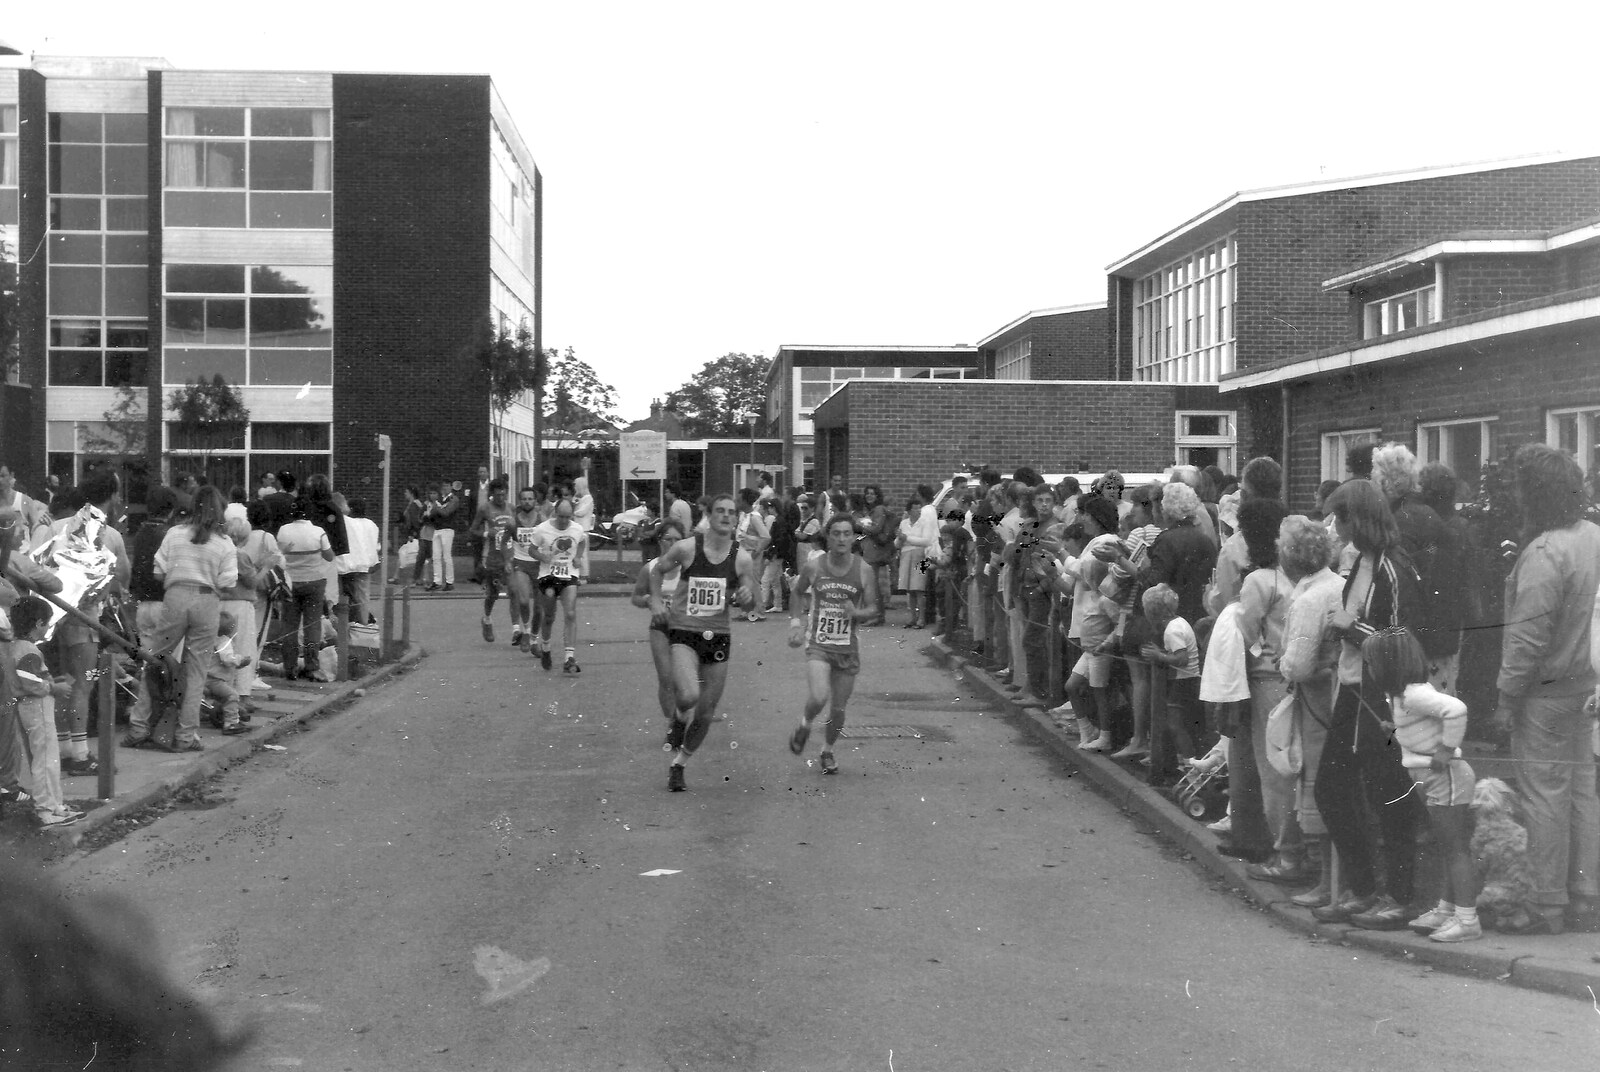 The runners run through Arnewood School, past the SCOLA building from The New Forest Marathon and Other Randomness, New Milton, Hampshire - 15th September 1985